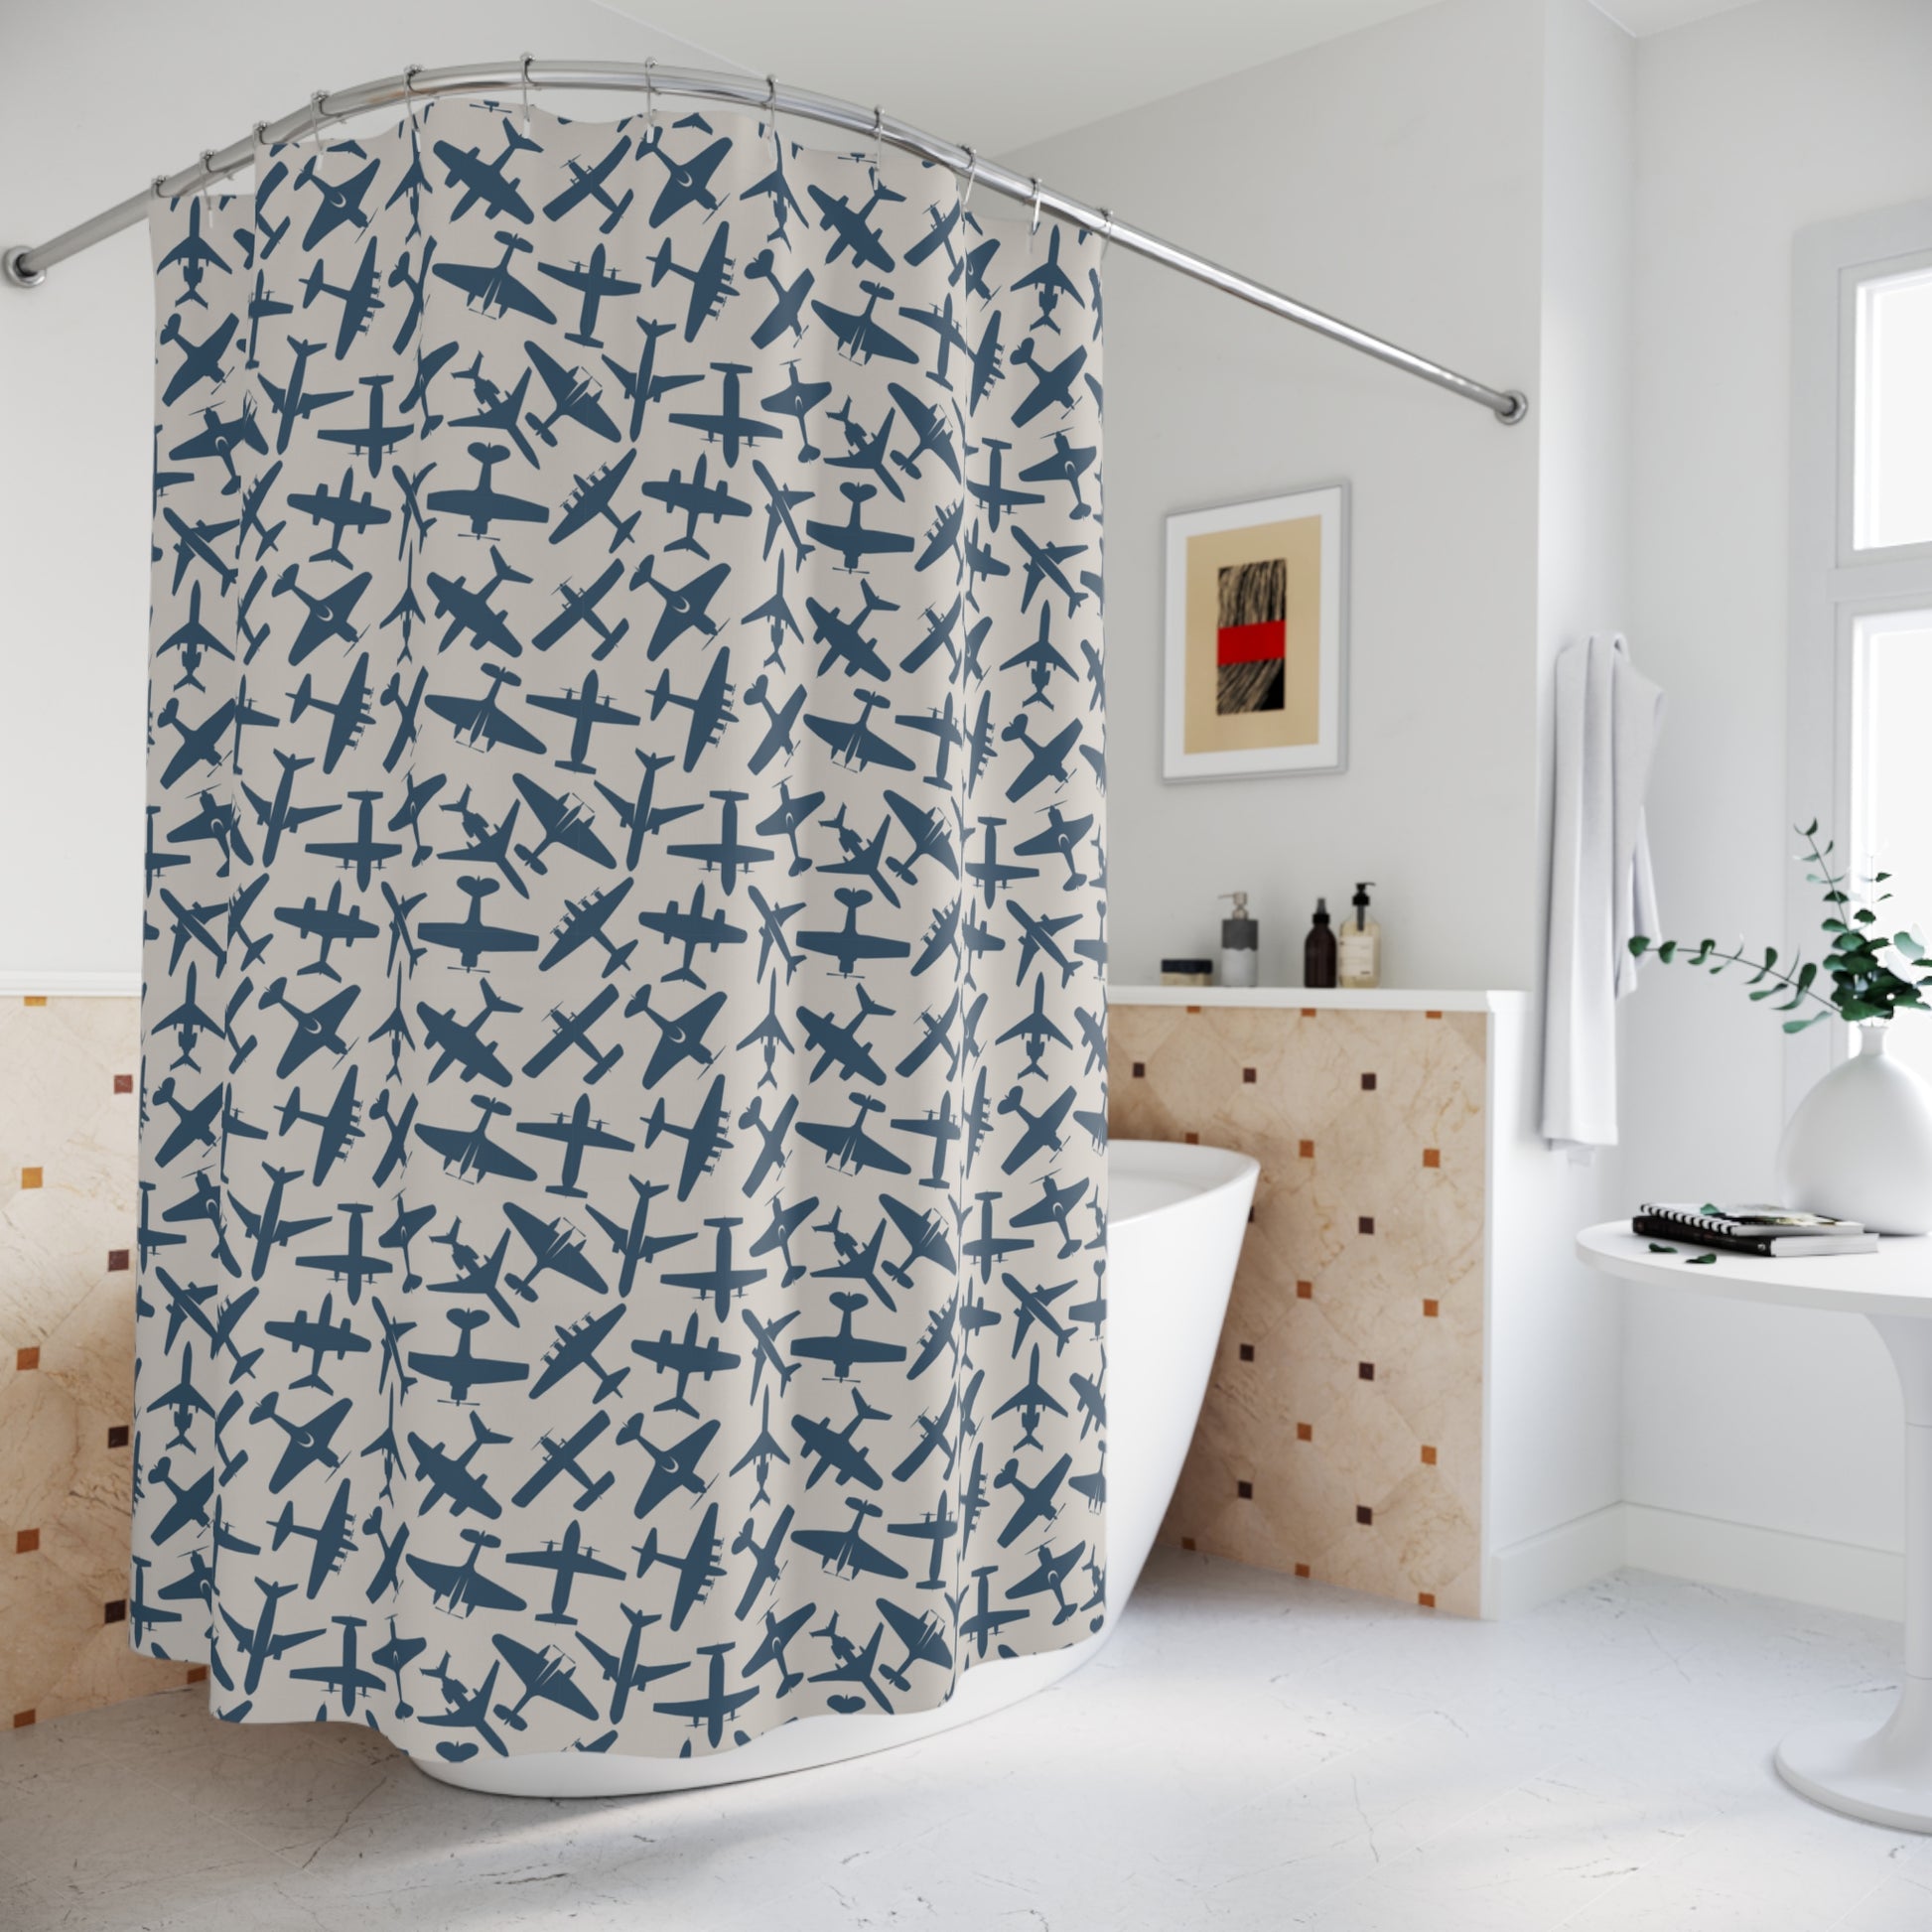 aviation merchandise, airplane patterned shower curtain, size reference pic